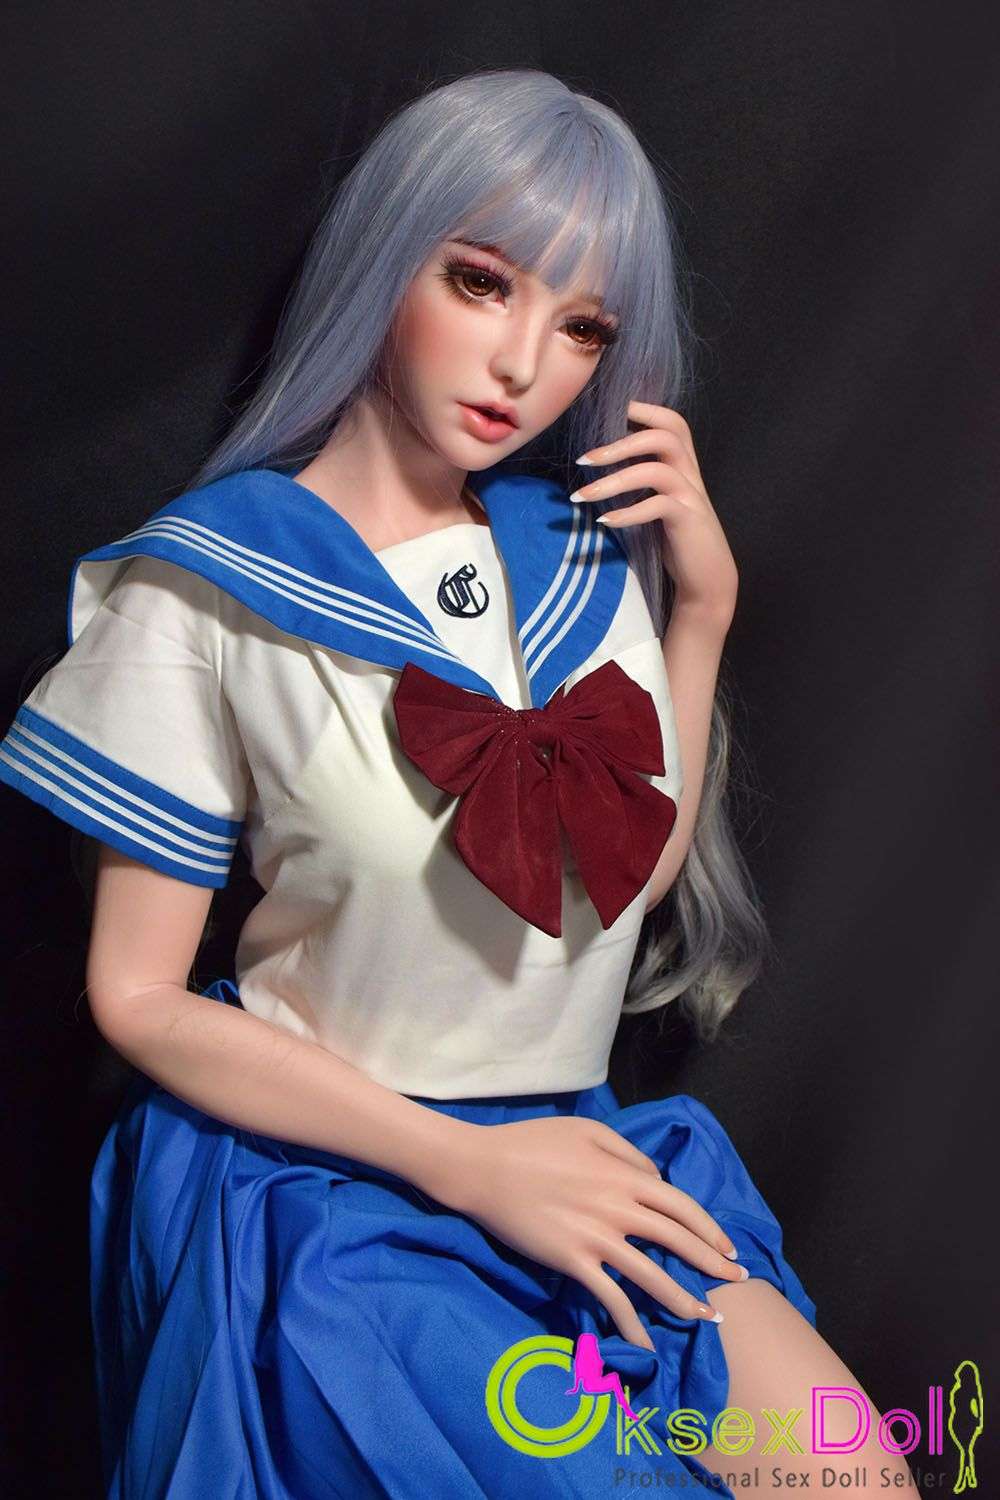 『rylie』 Mature Doll Album Of Elsababe Doll